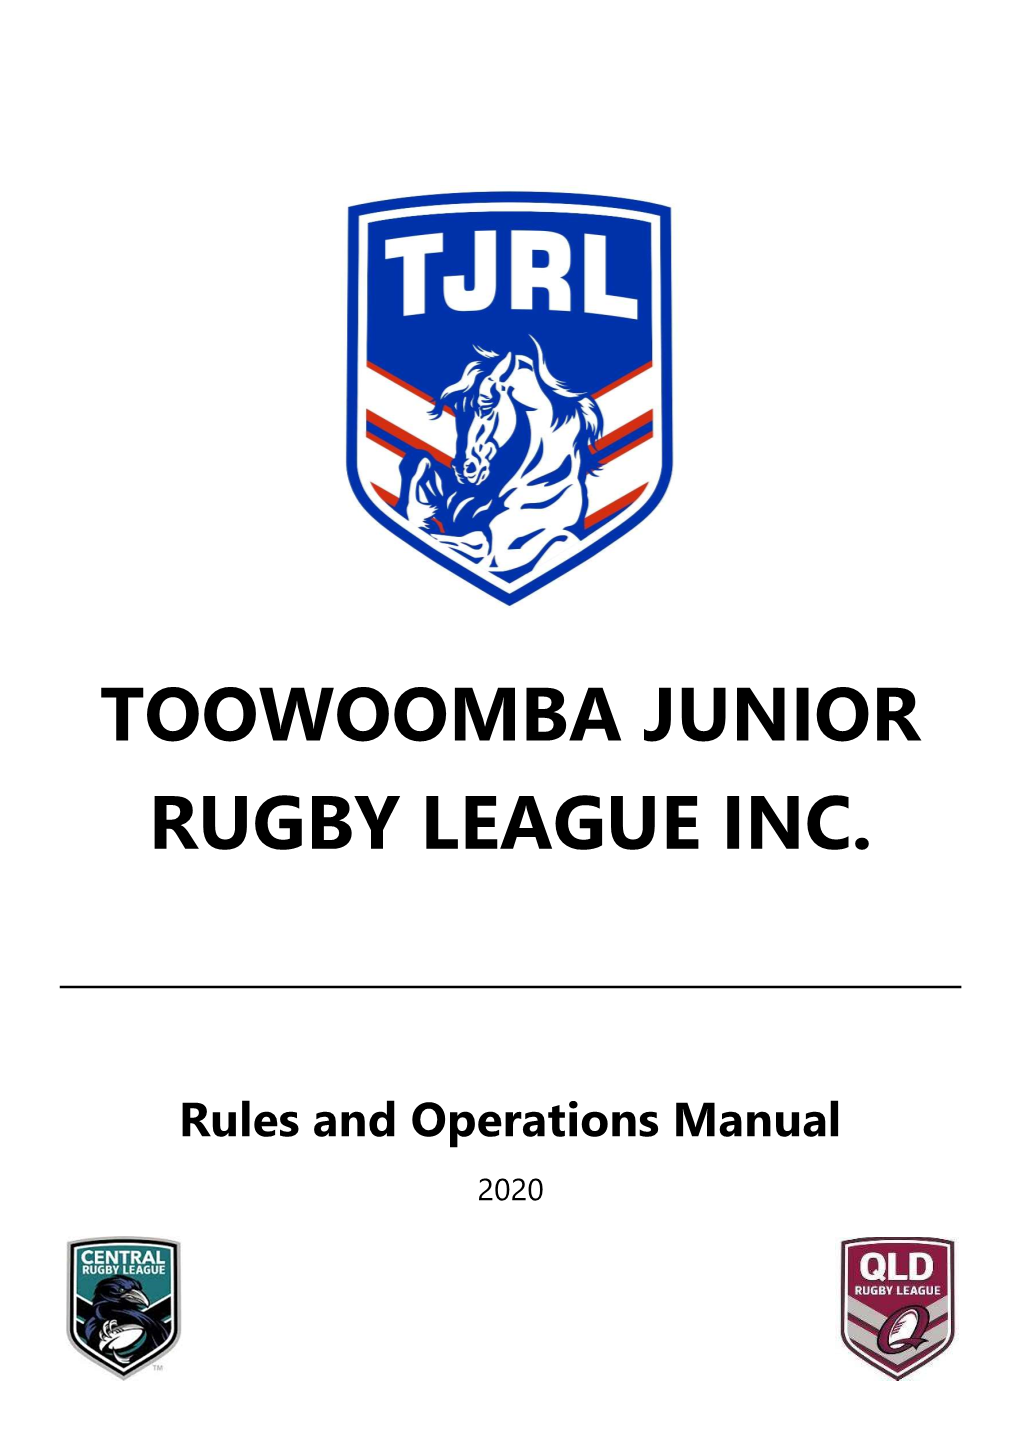 TJRL Rules and Operations Manual 2020